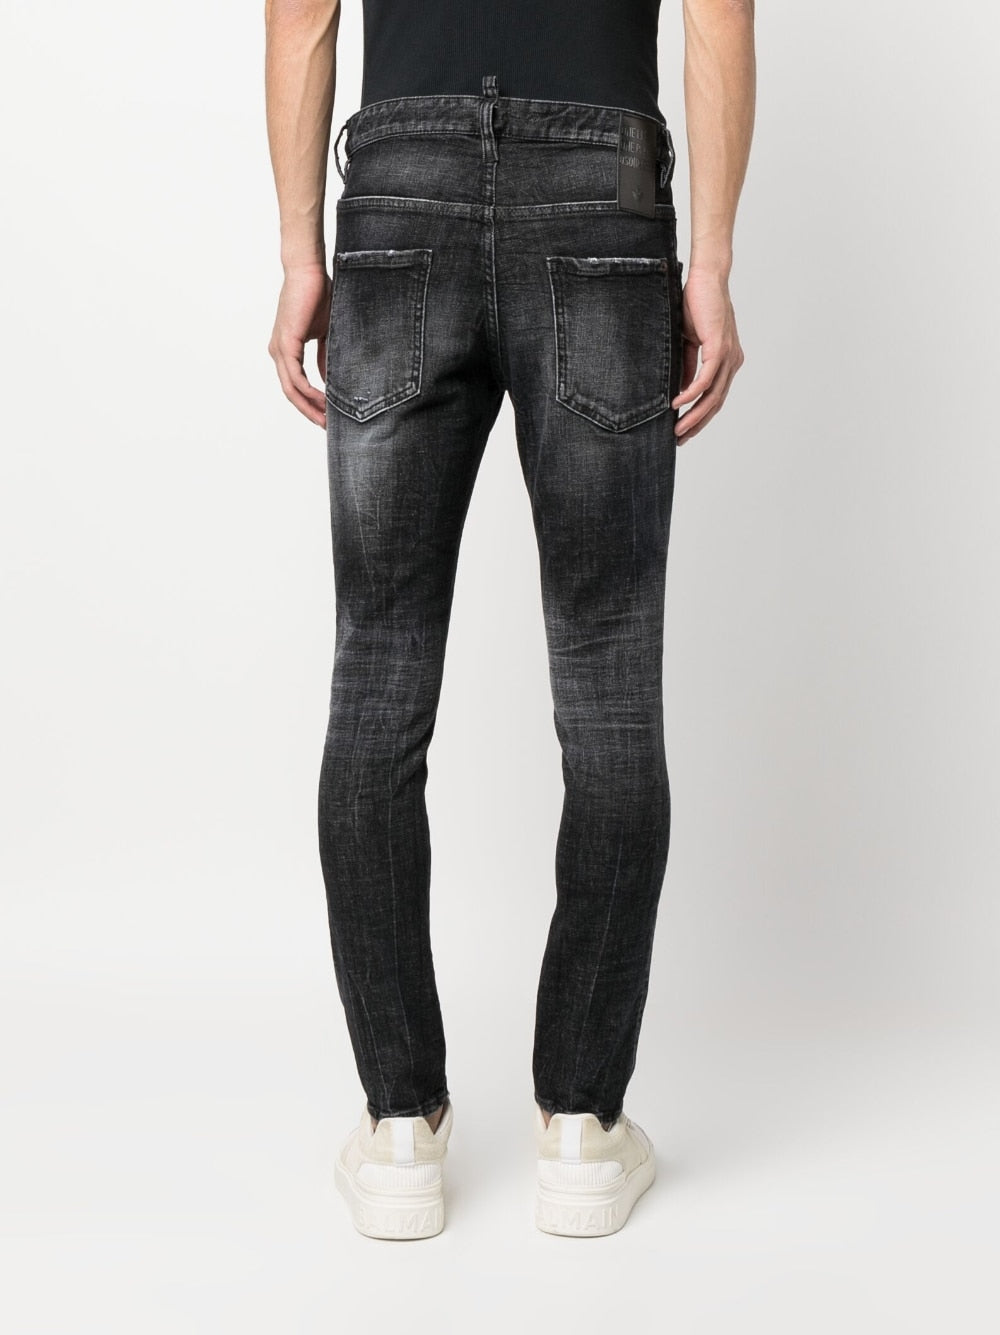 DSQUARED2 - Jean Skater gris One life